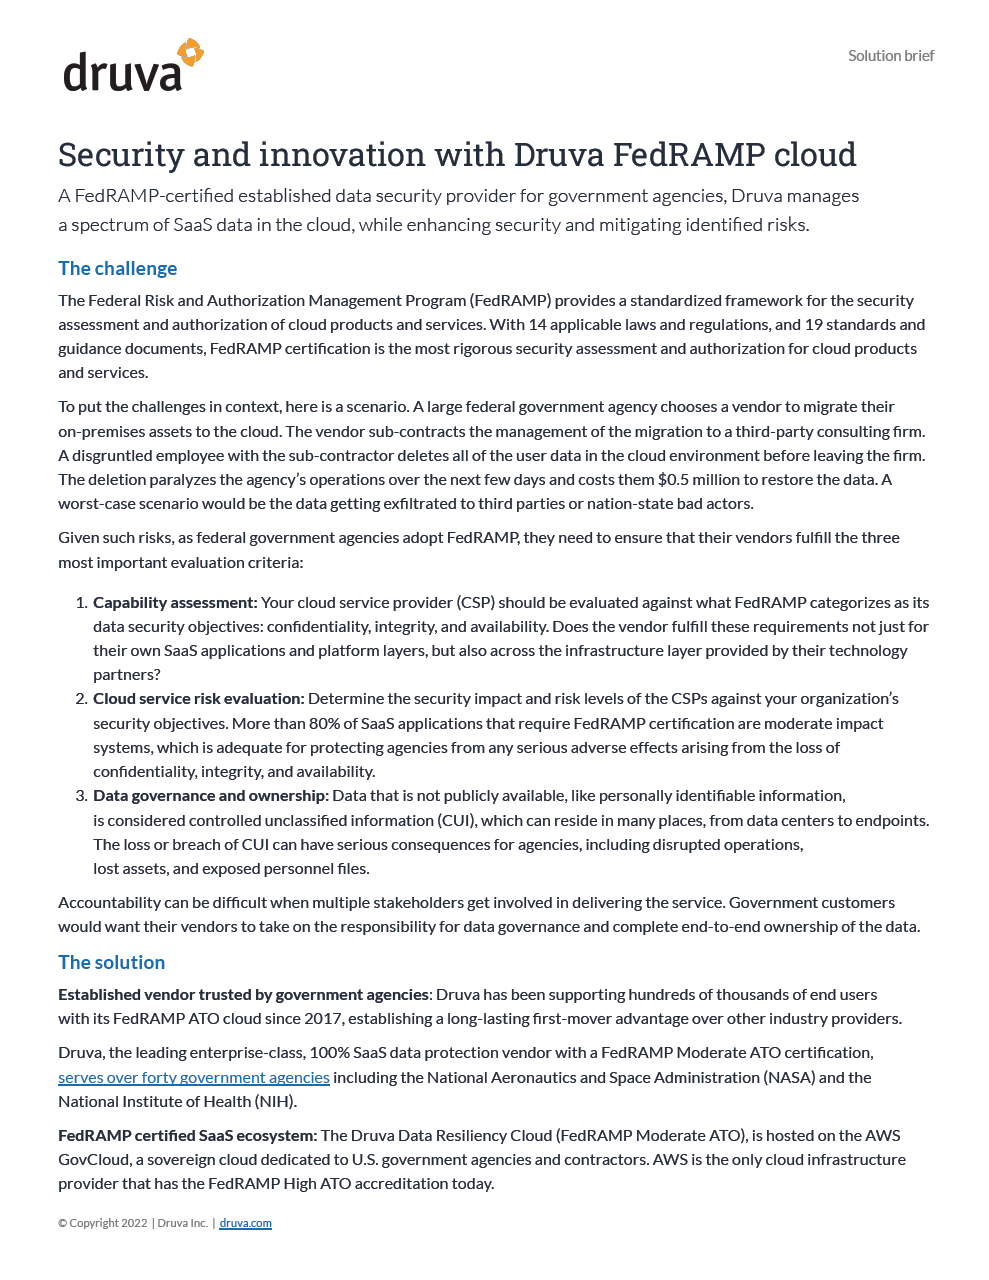 Security and Innovation with Druva FedRAMP Cloud